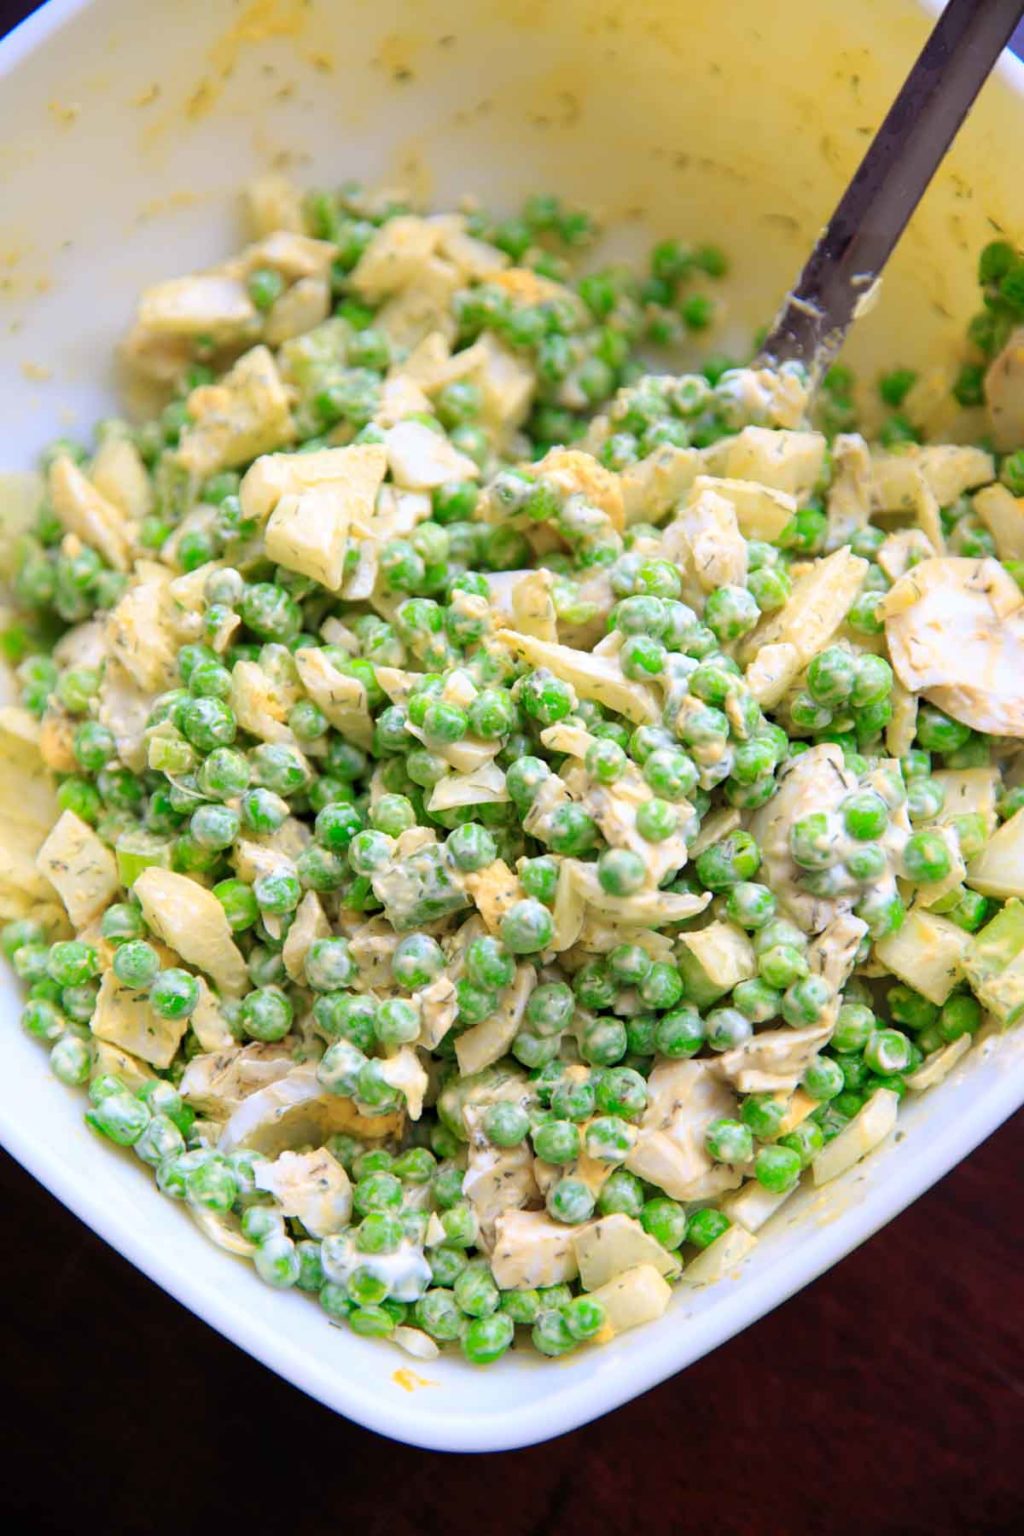 Grandma's Pea Salad with Dill from Trial and Eater